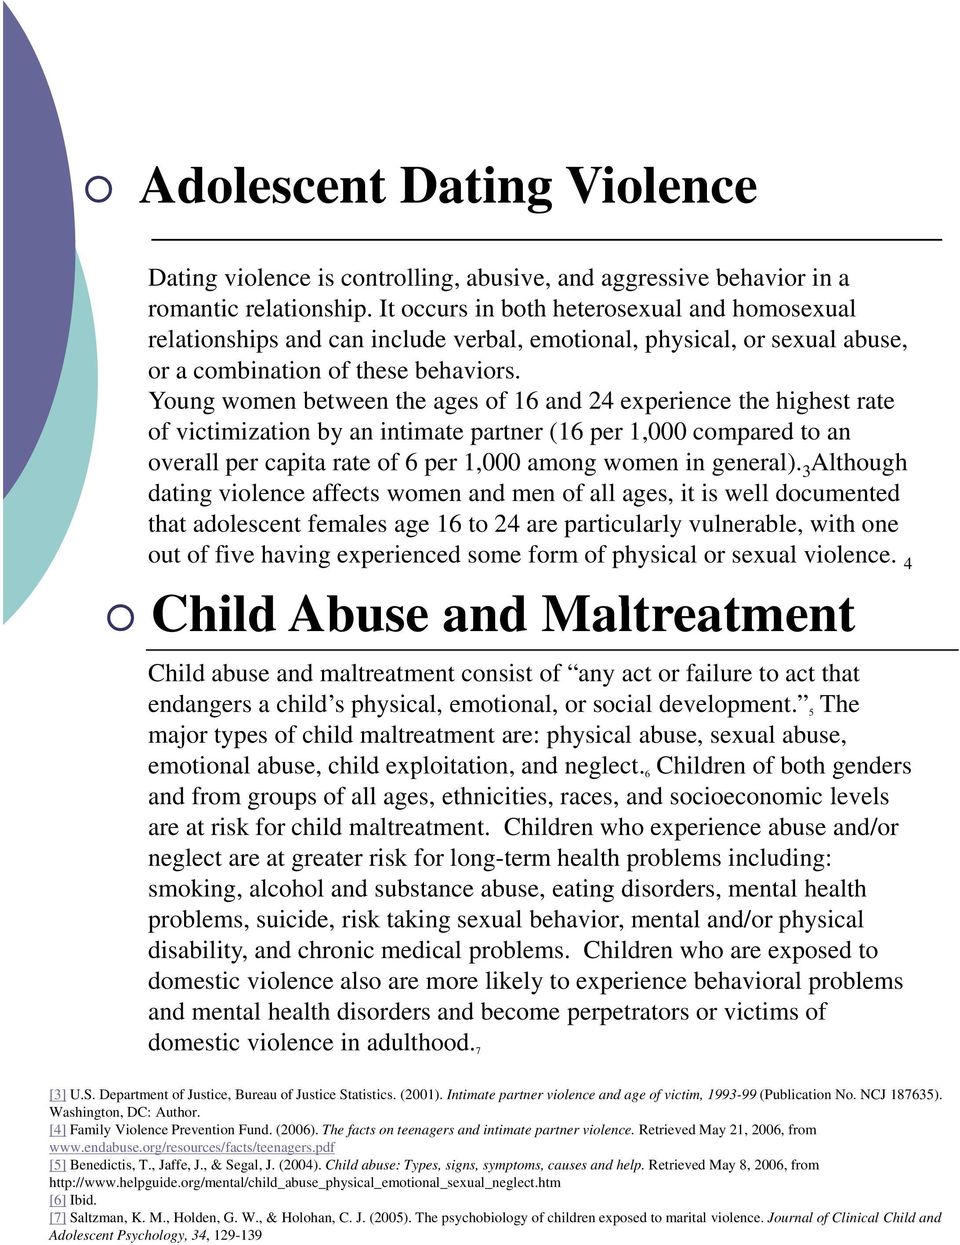 Young women between the ages of 16 and 24 experience the highest rate of victimization by an intimate partner (16 per 1,000 compared to an overall per capita rate of 6 per 1,000 among women in